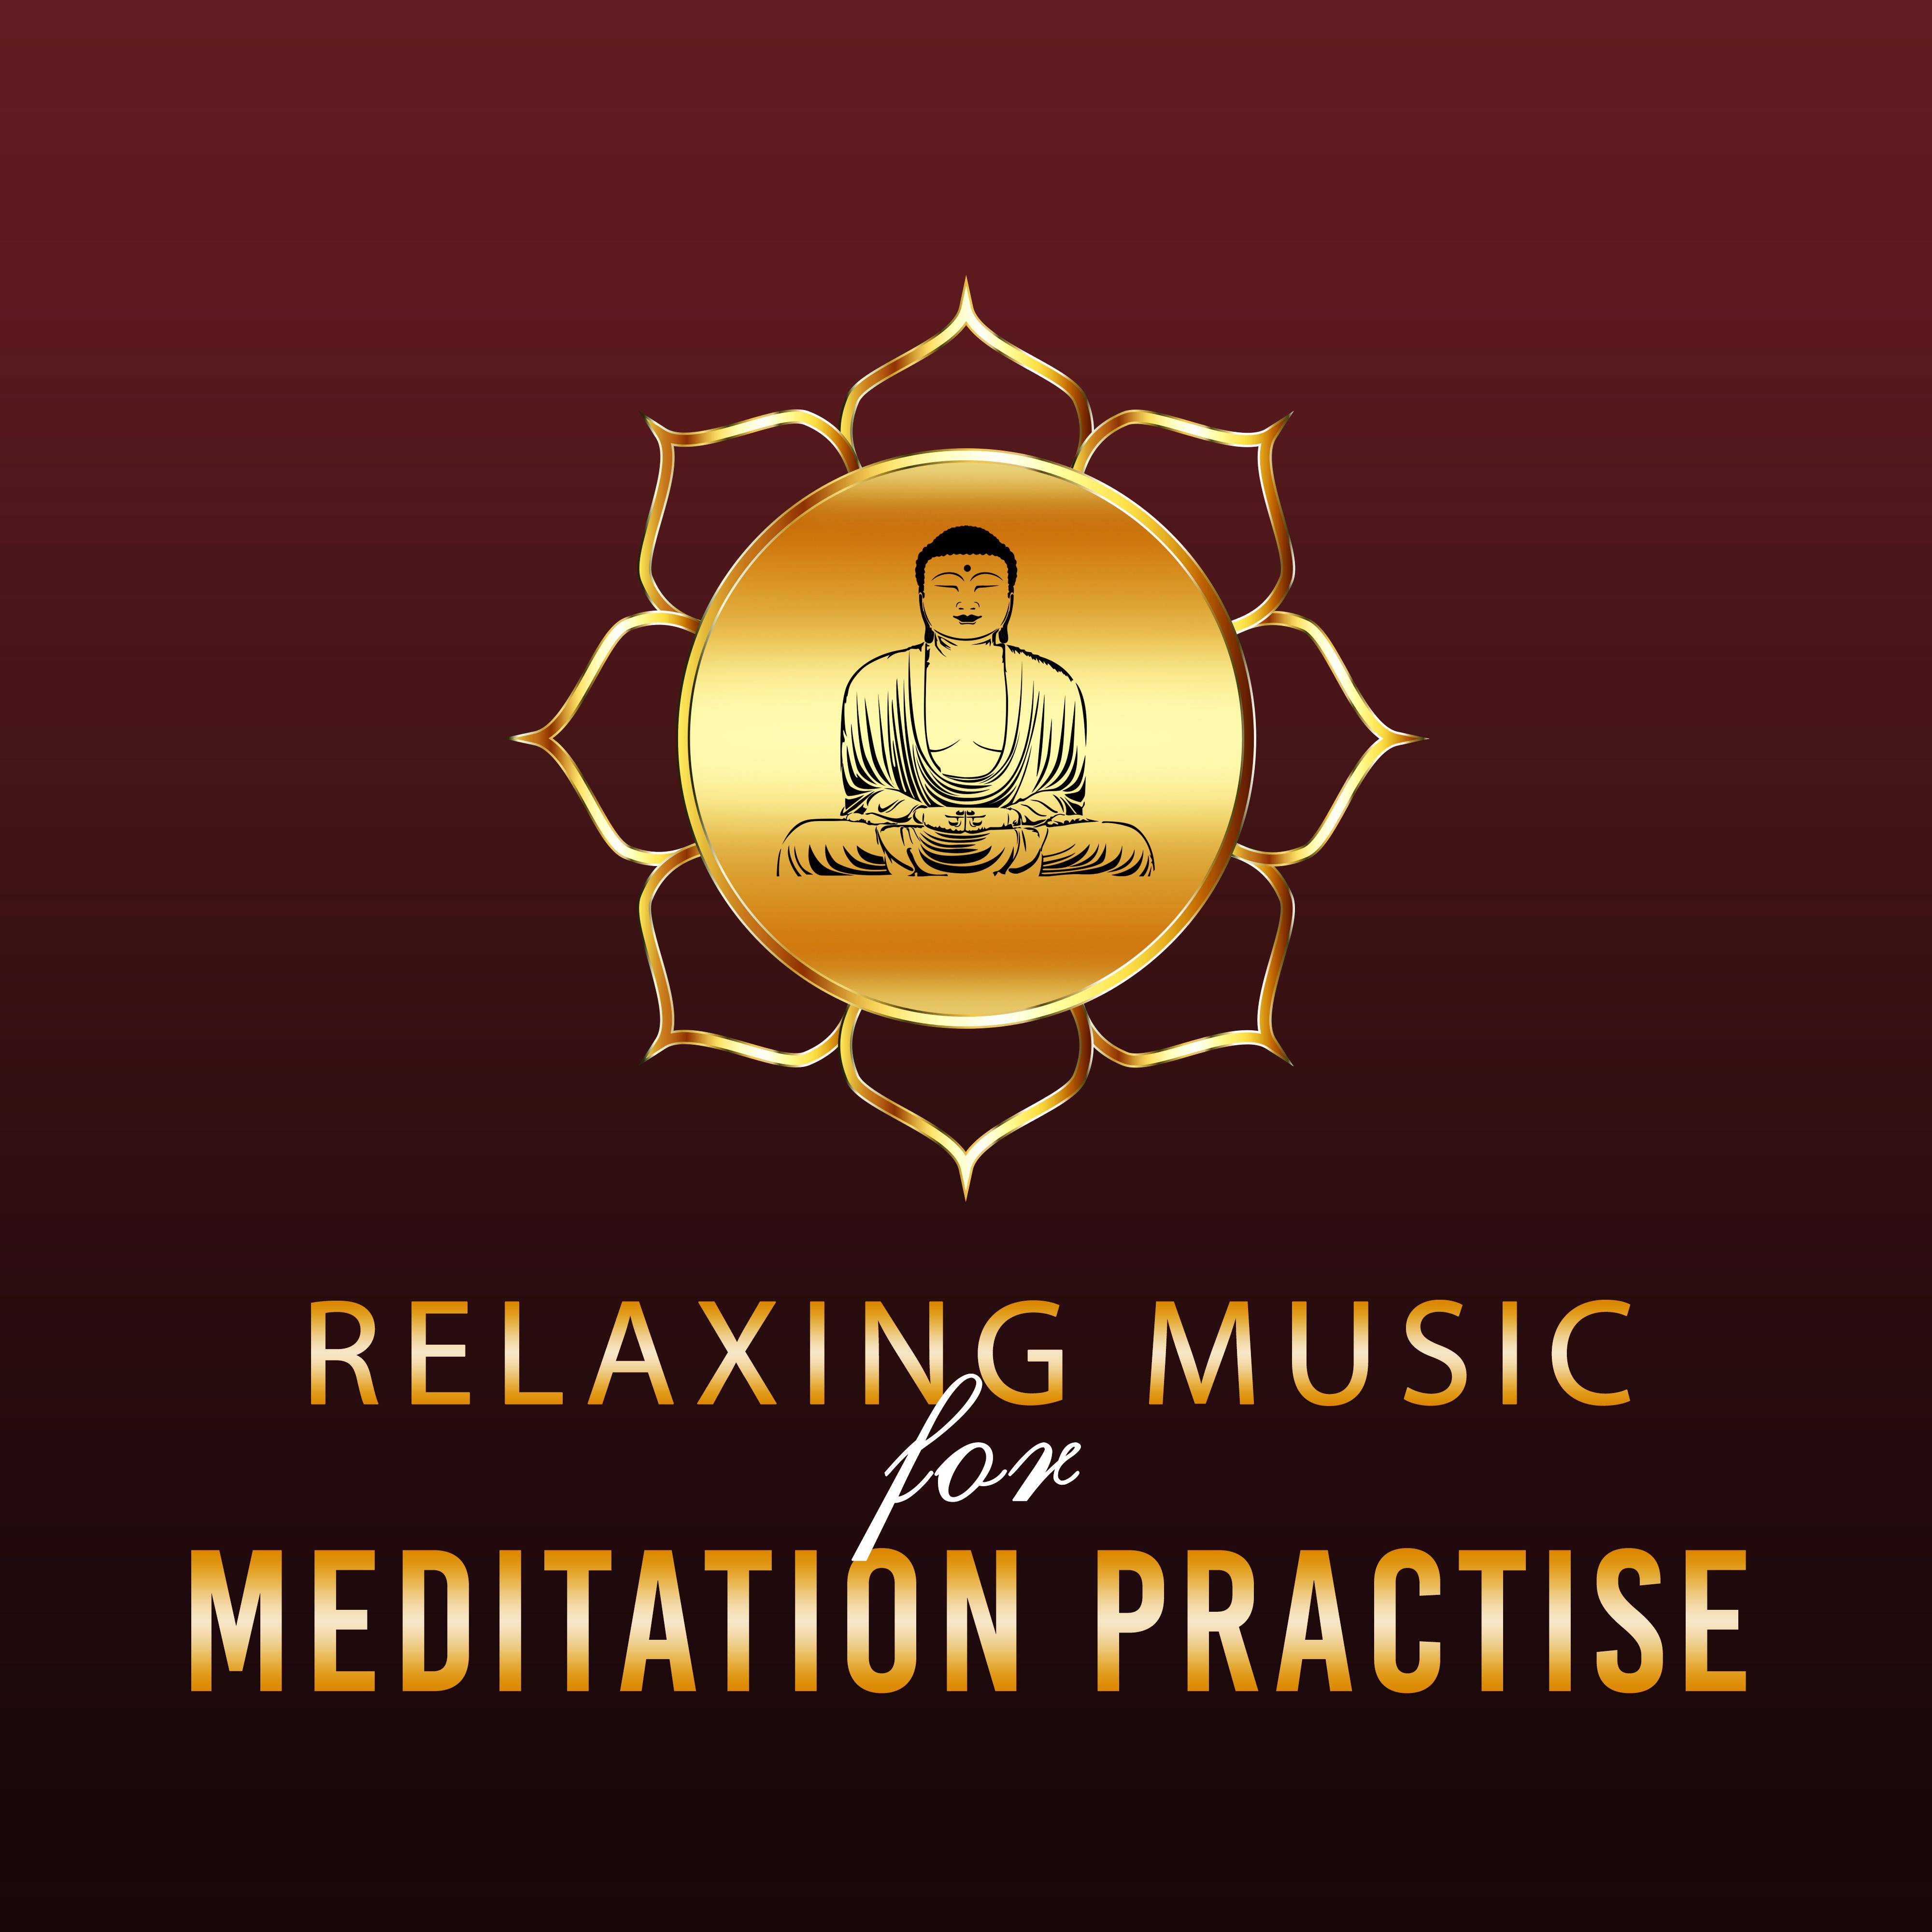 Relaxing Music for Meditation Practise  Peaceful Songs of Nature, Music for Meditation Yoga, Relaxation, Instrumental New Age